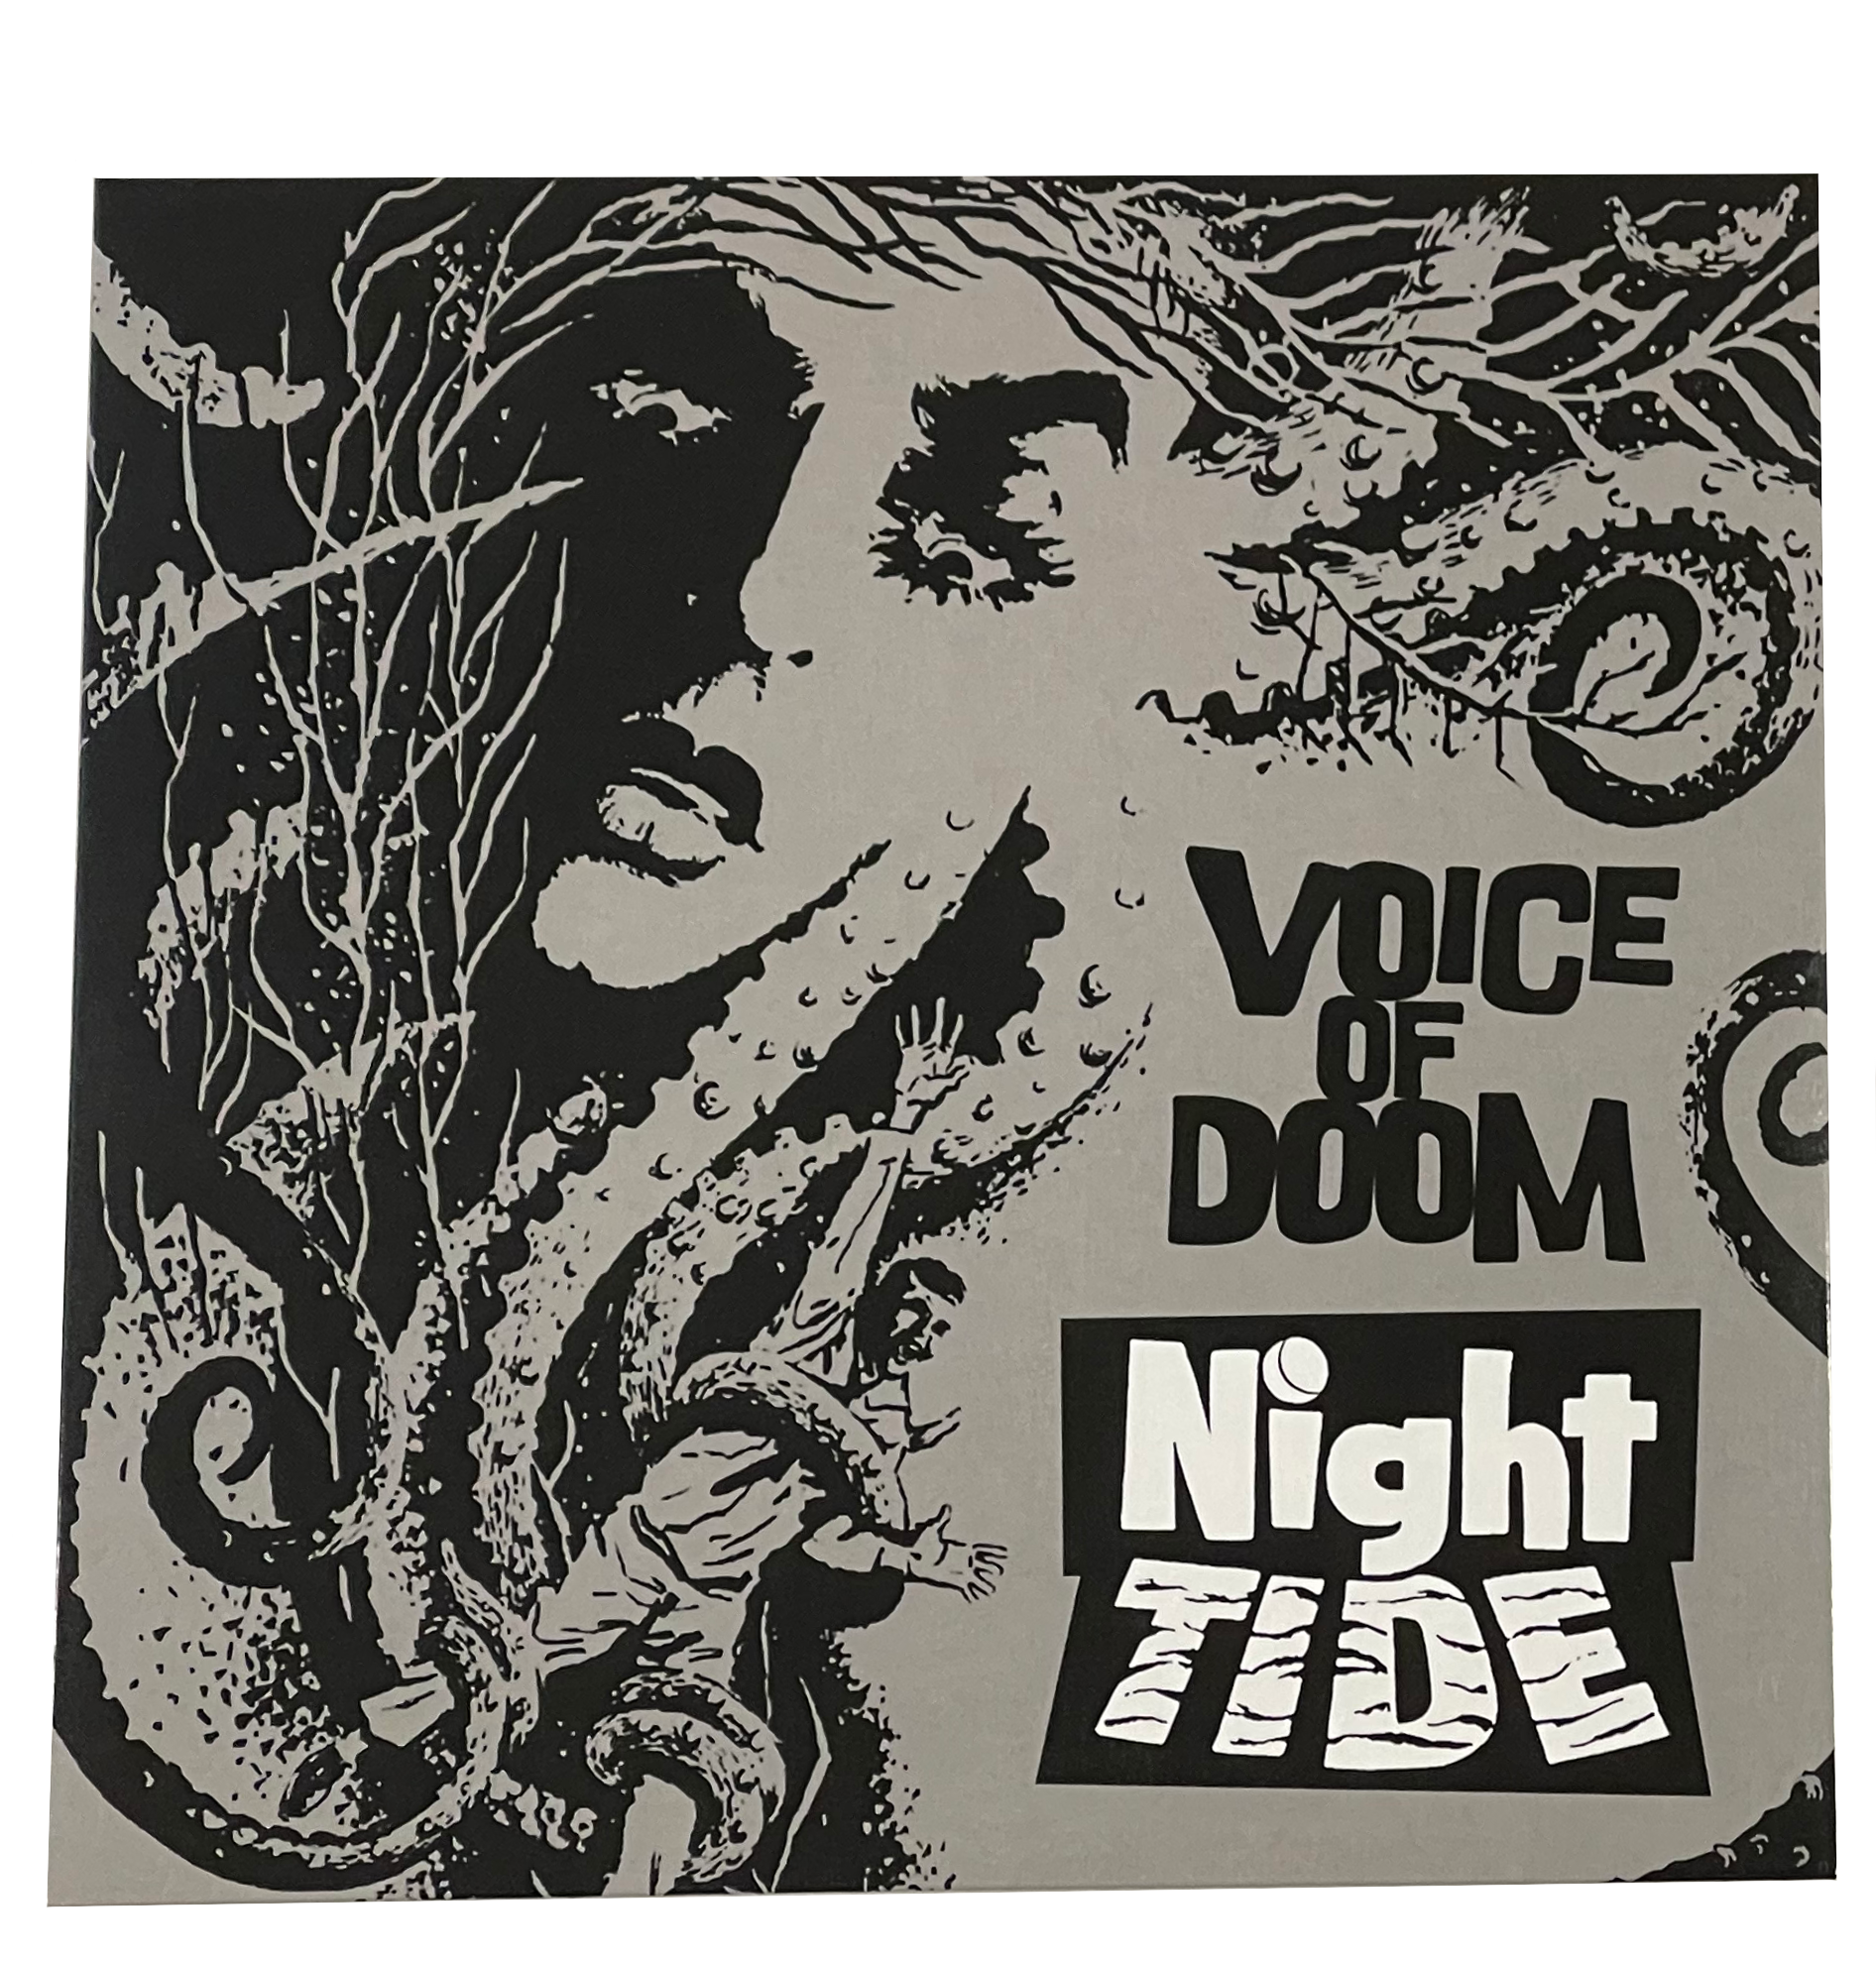 VOICE OF DOOM: "NIGHT TIDE" LIMITED EDITION 7" SINGLE